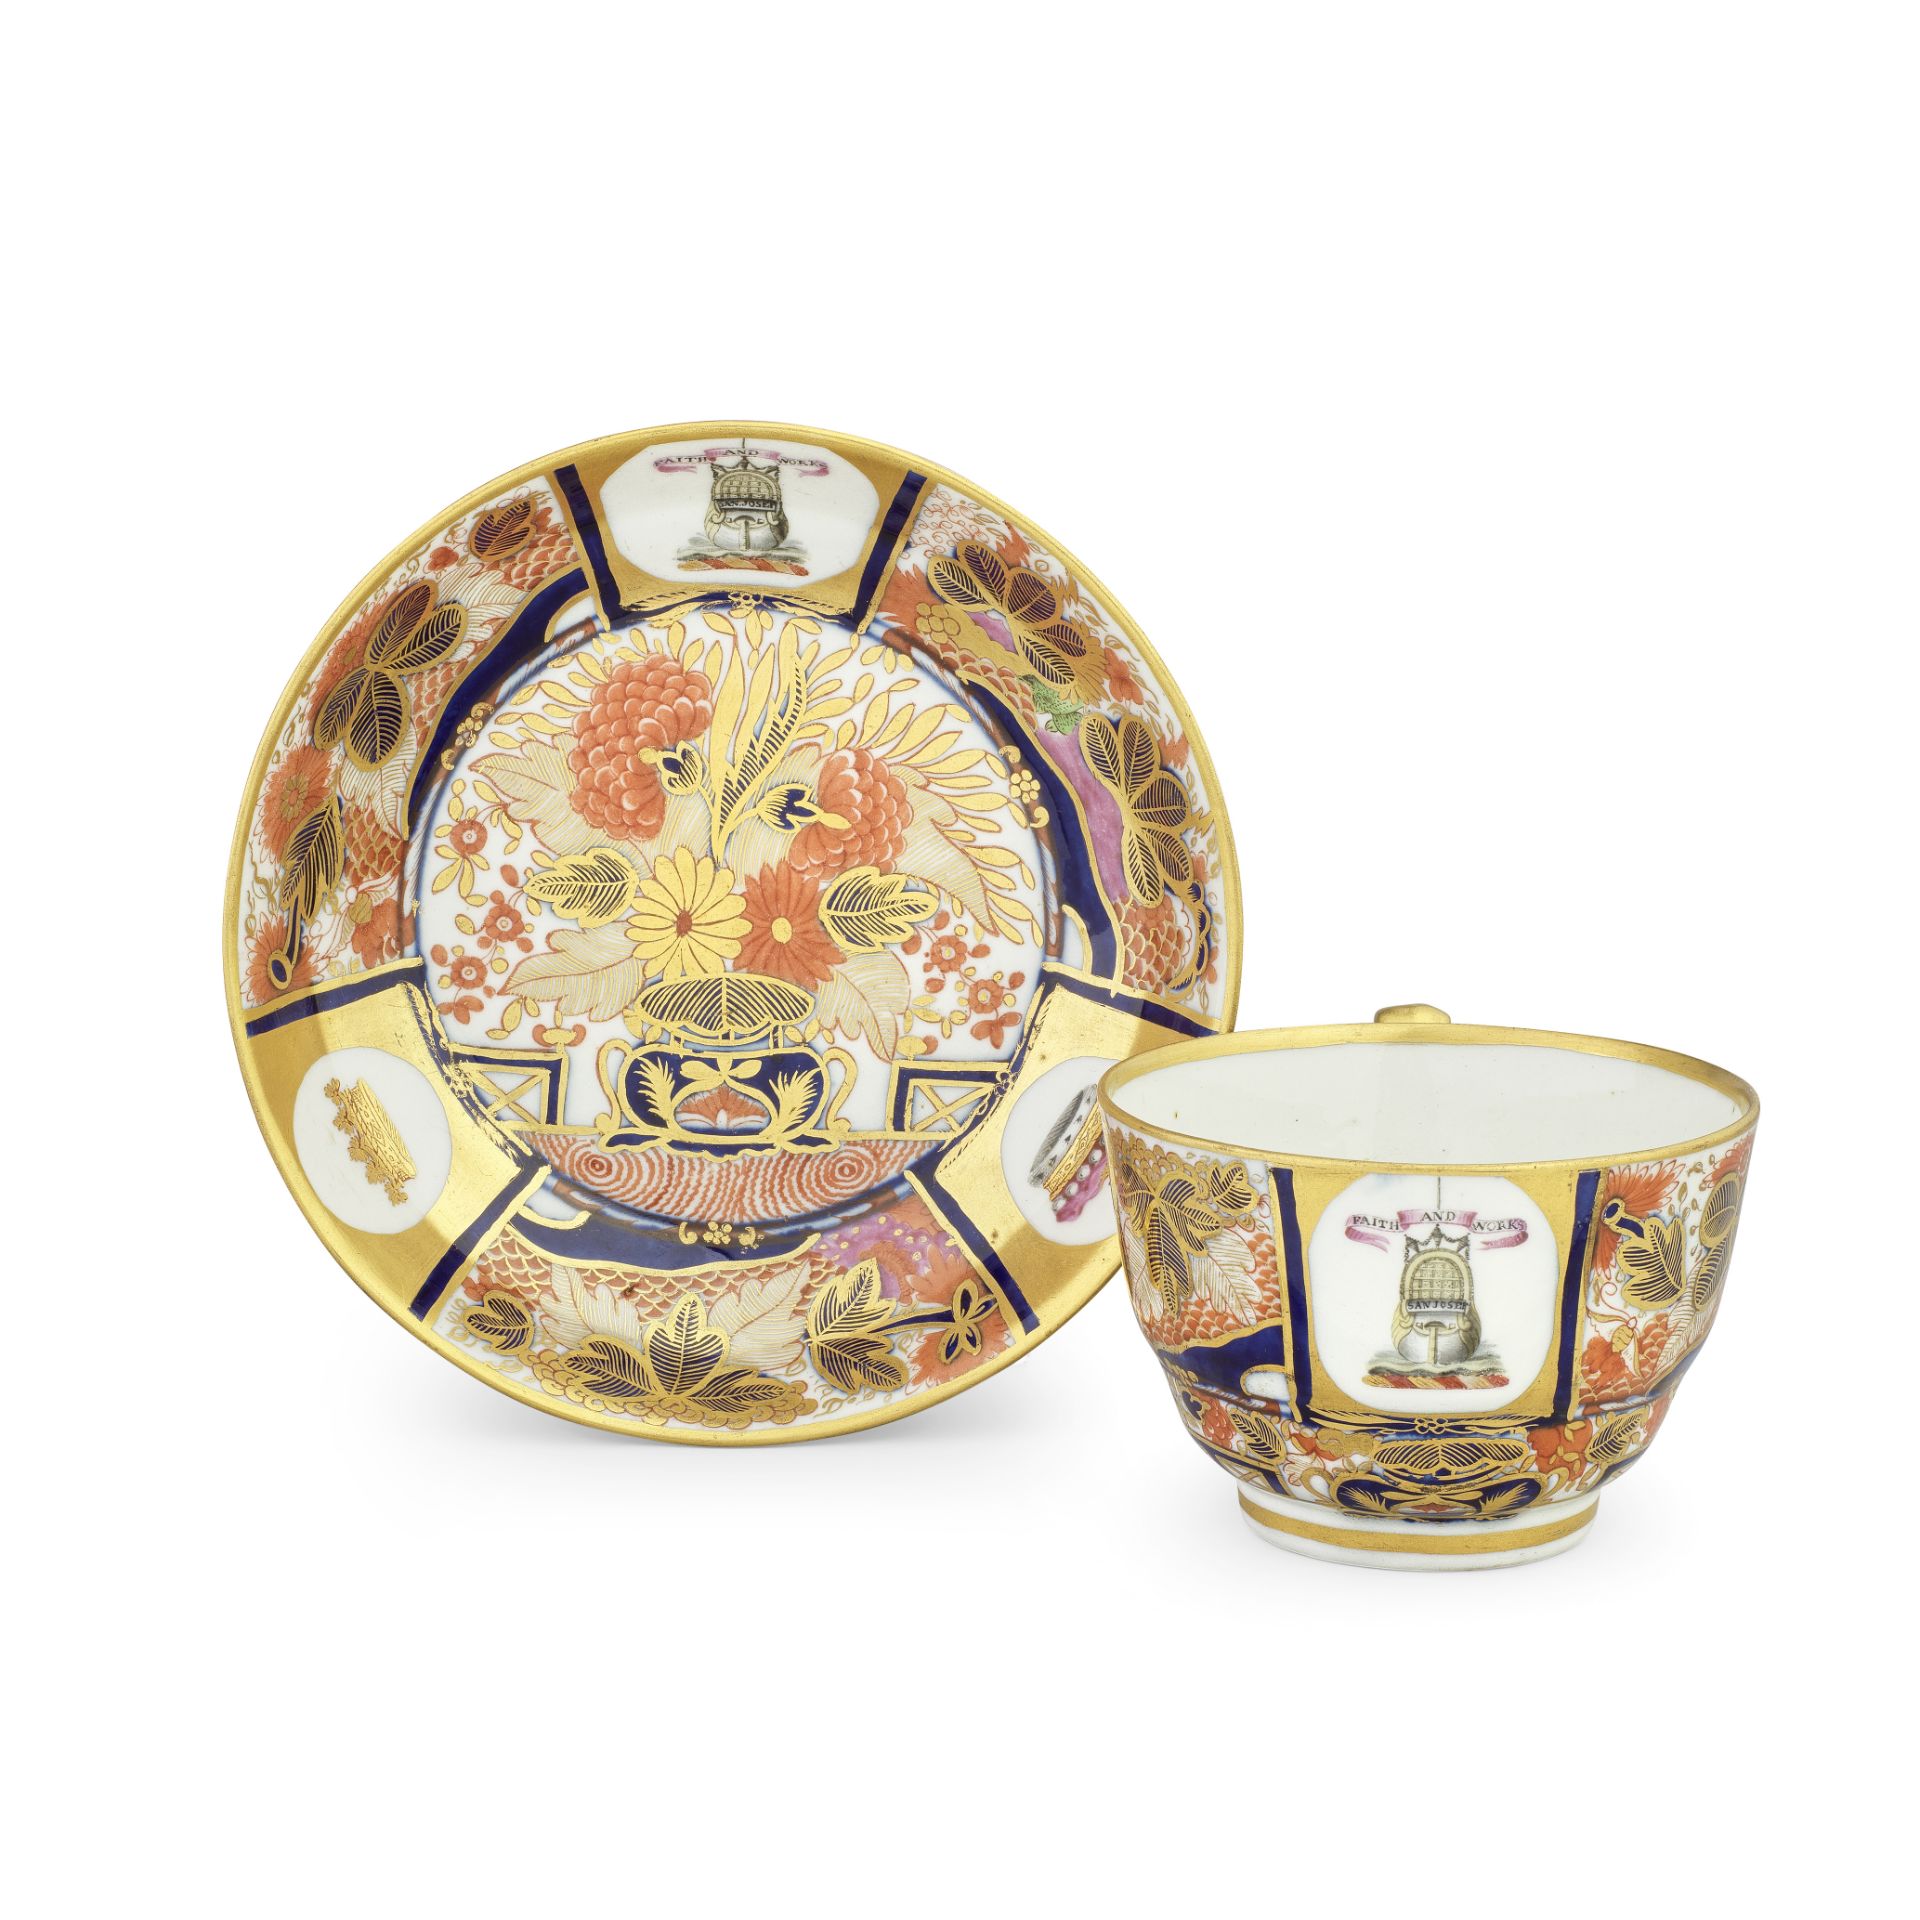 A Chamberlain Worcester teacup and saucer from the 'Horatia Service', circa 1802-03